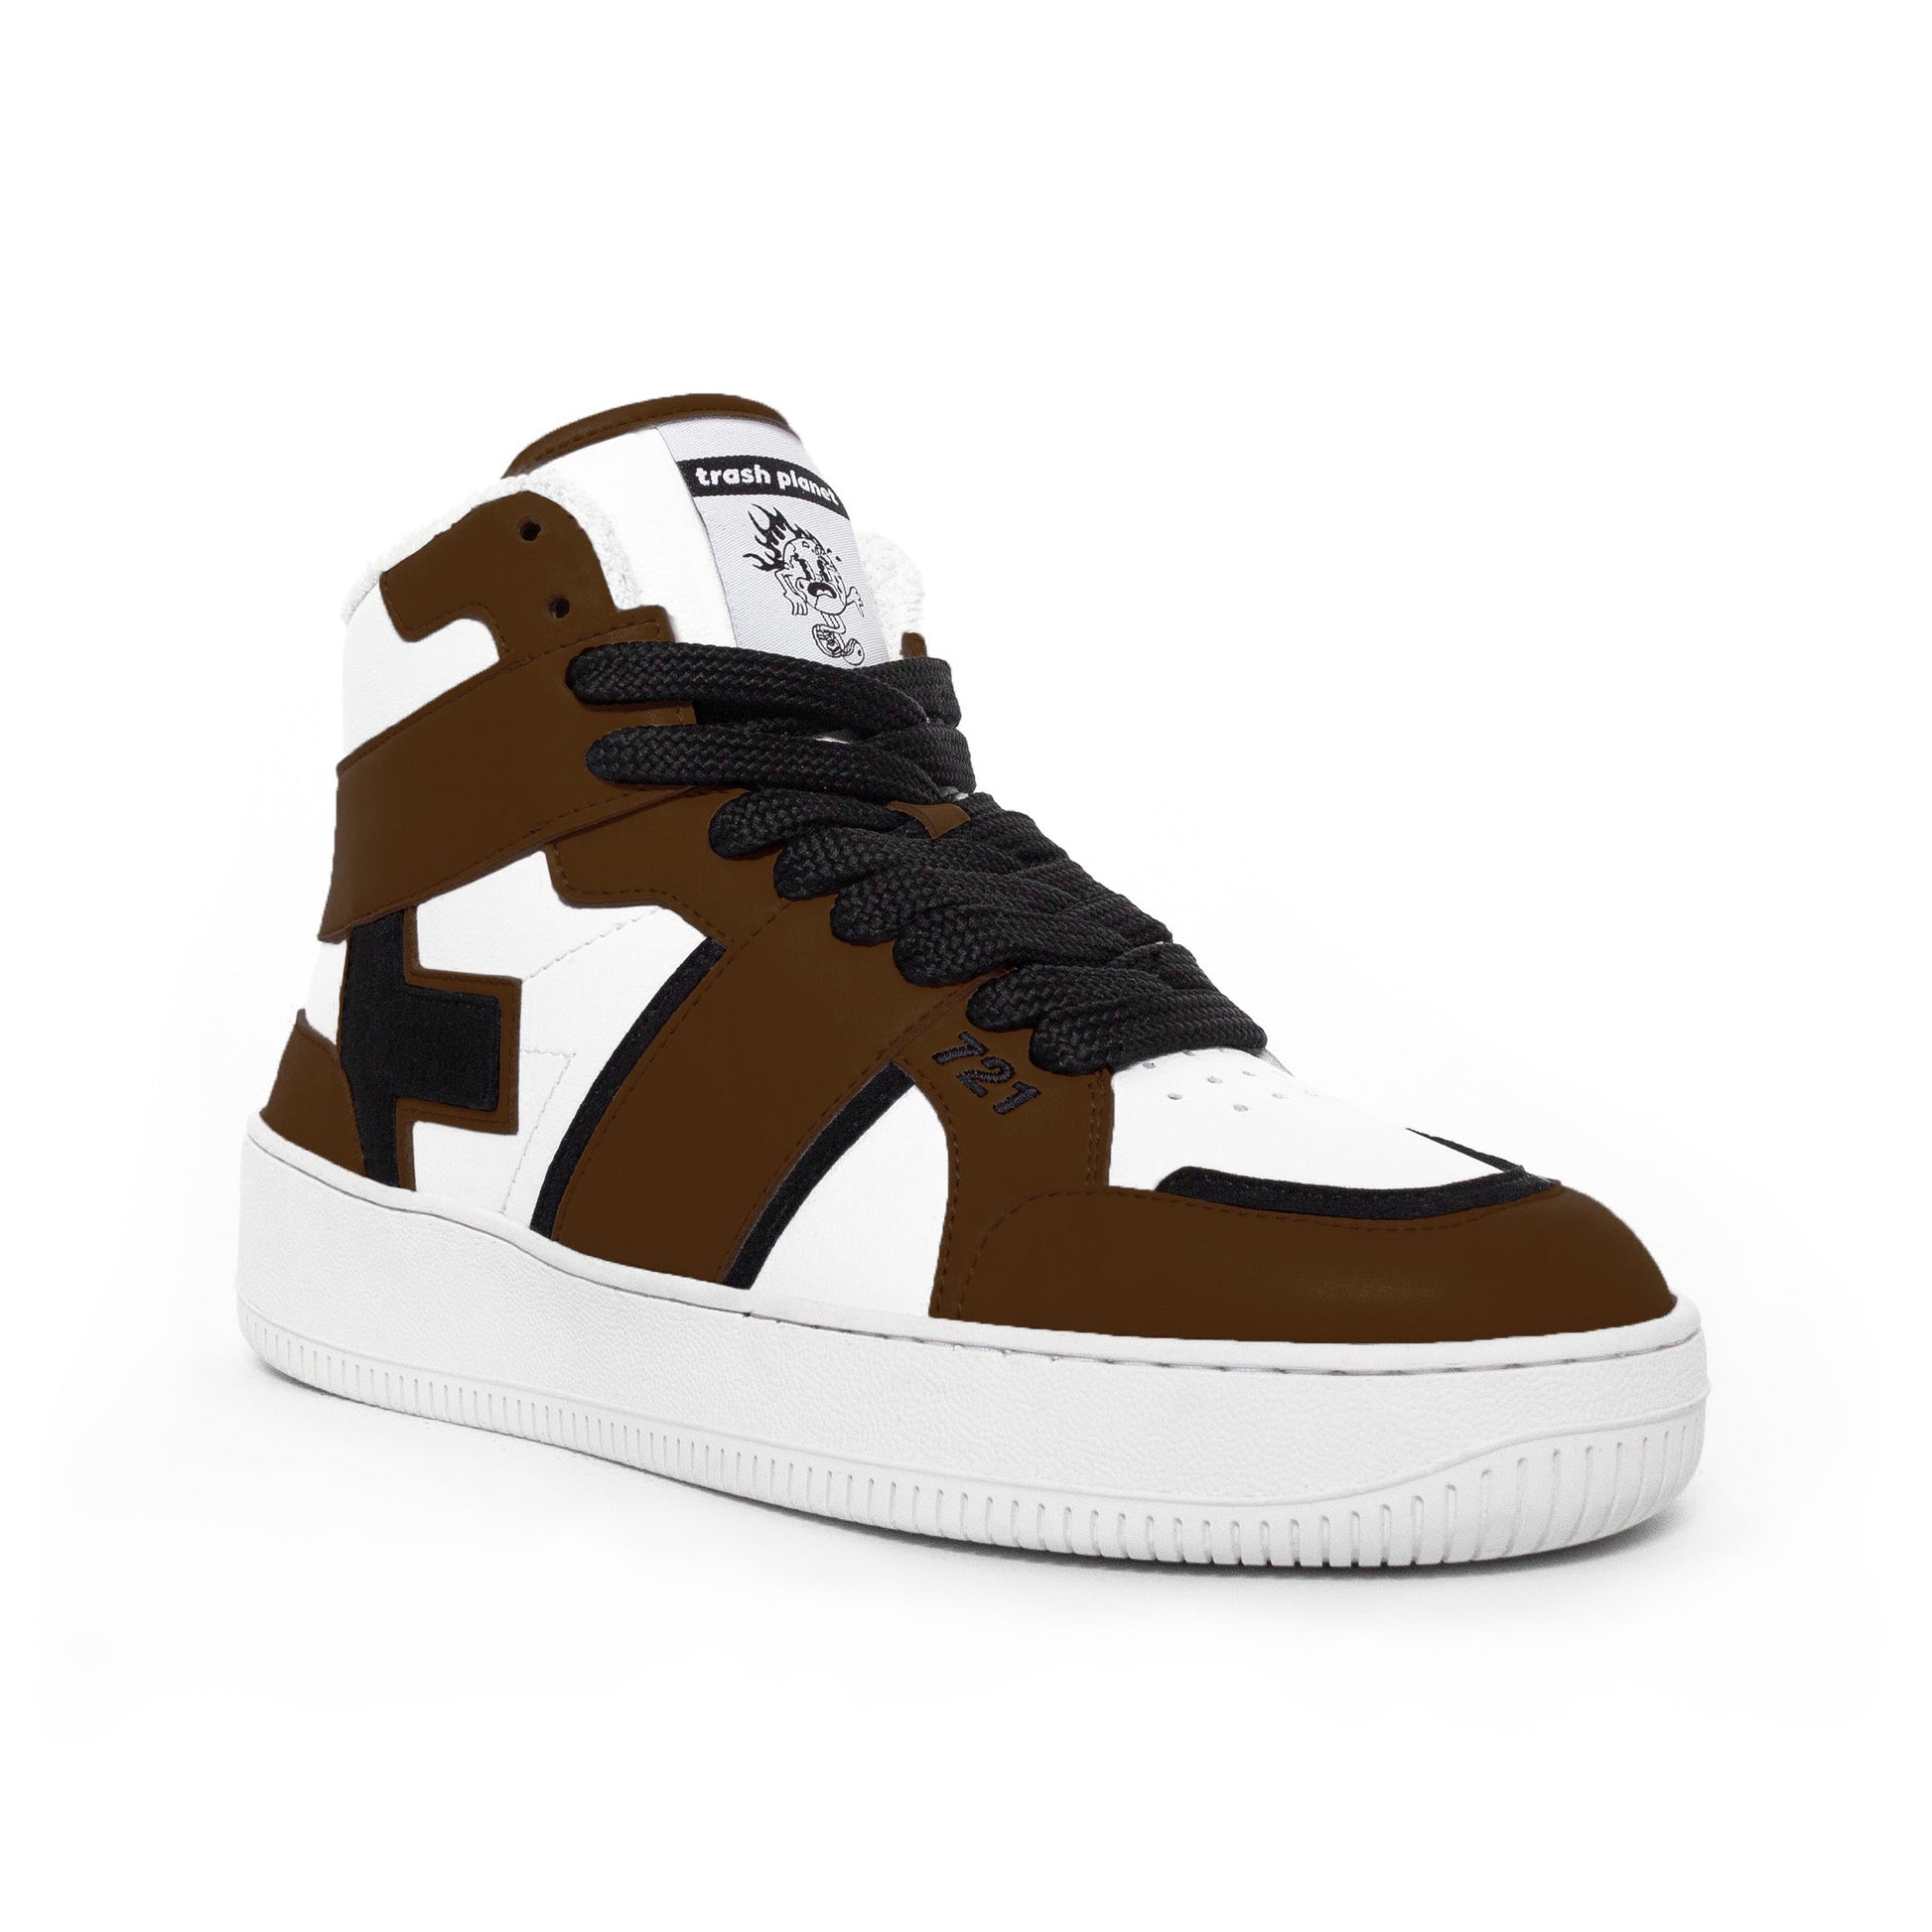 Angled view of a recycled vegan corn leather Brown High Top sneaker with black and white details by Trash Planet